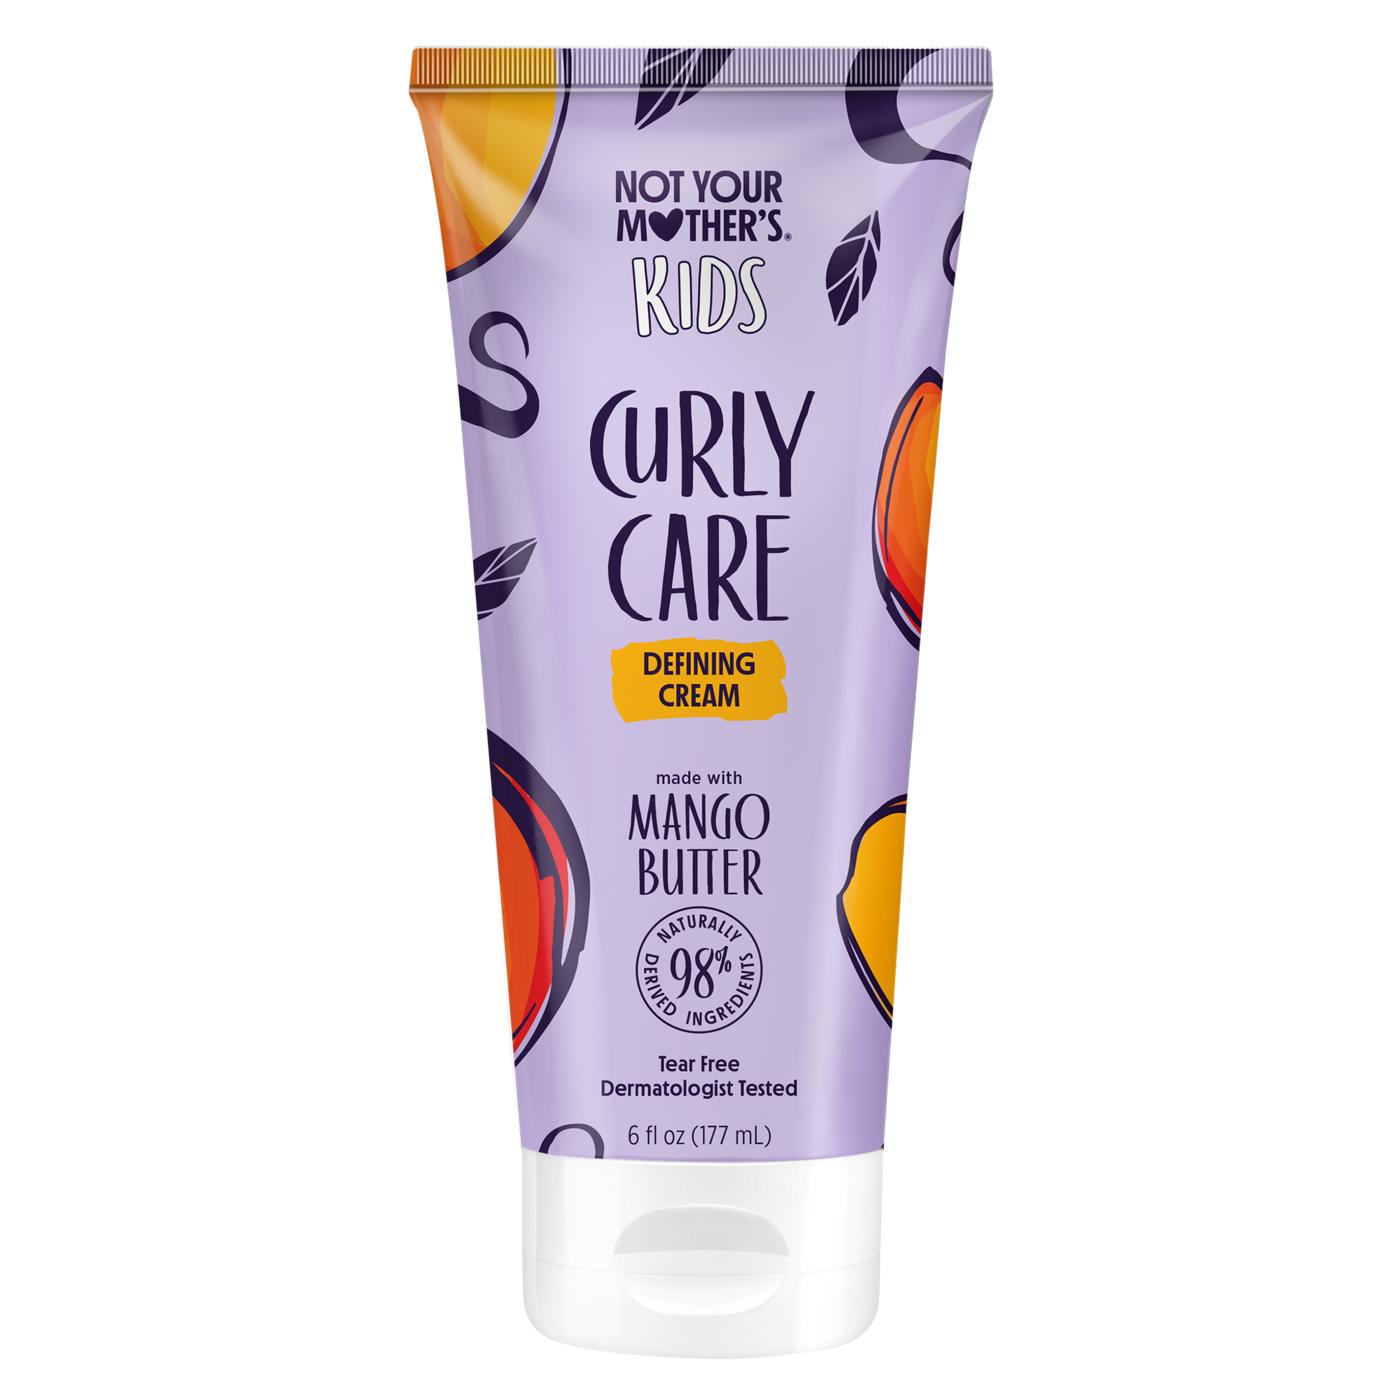 Not Your Mother's Kids Curly Care Defining Cream; image 1 of 2